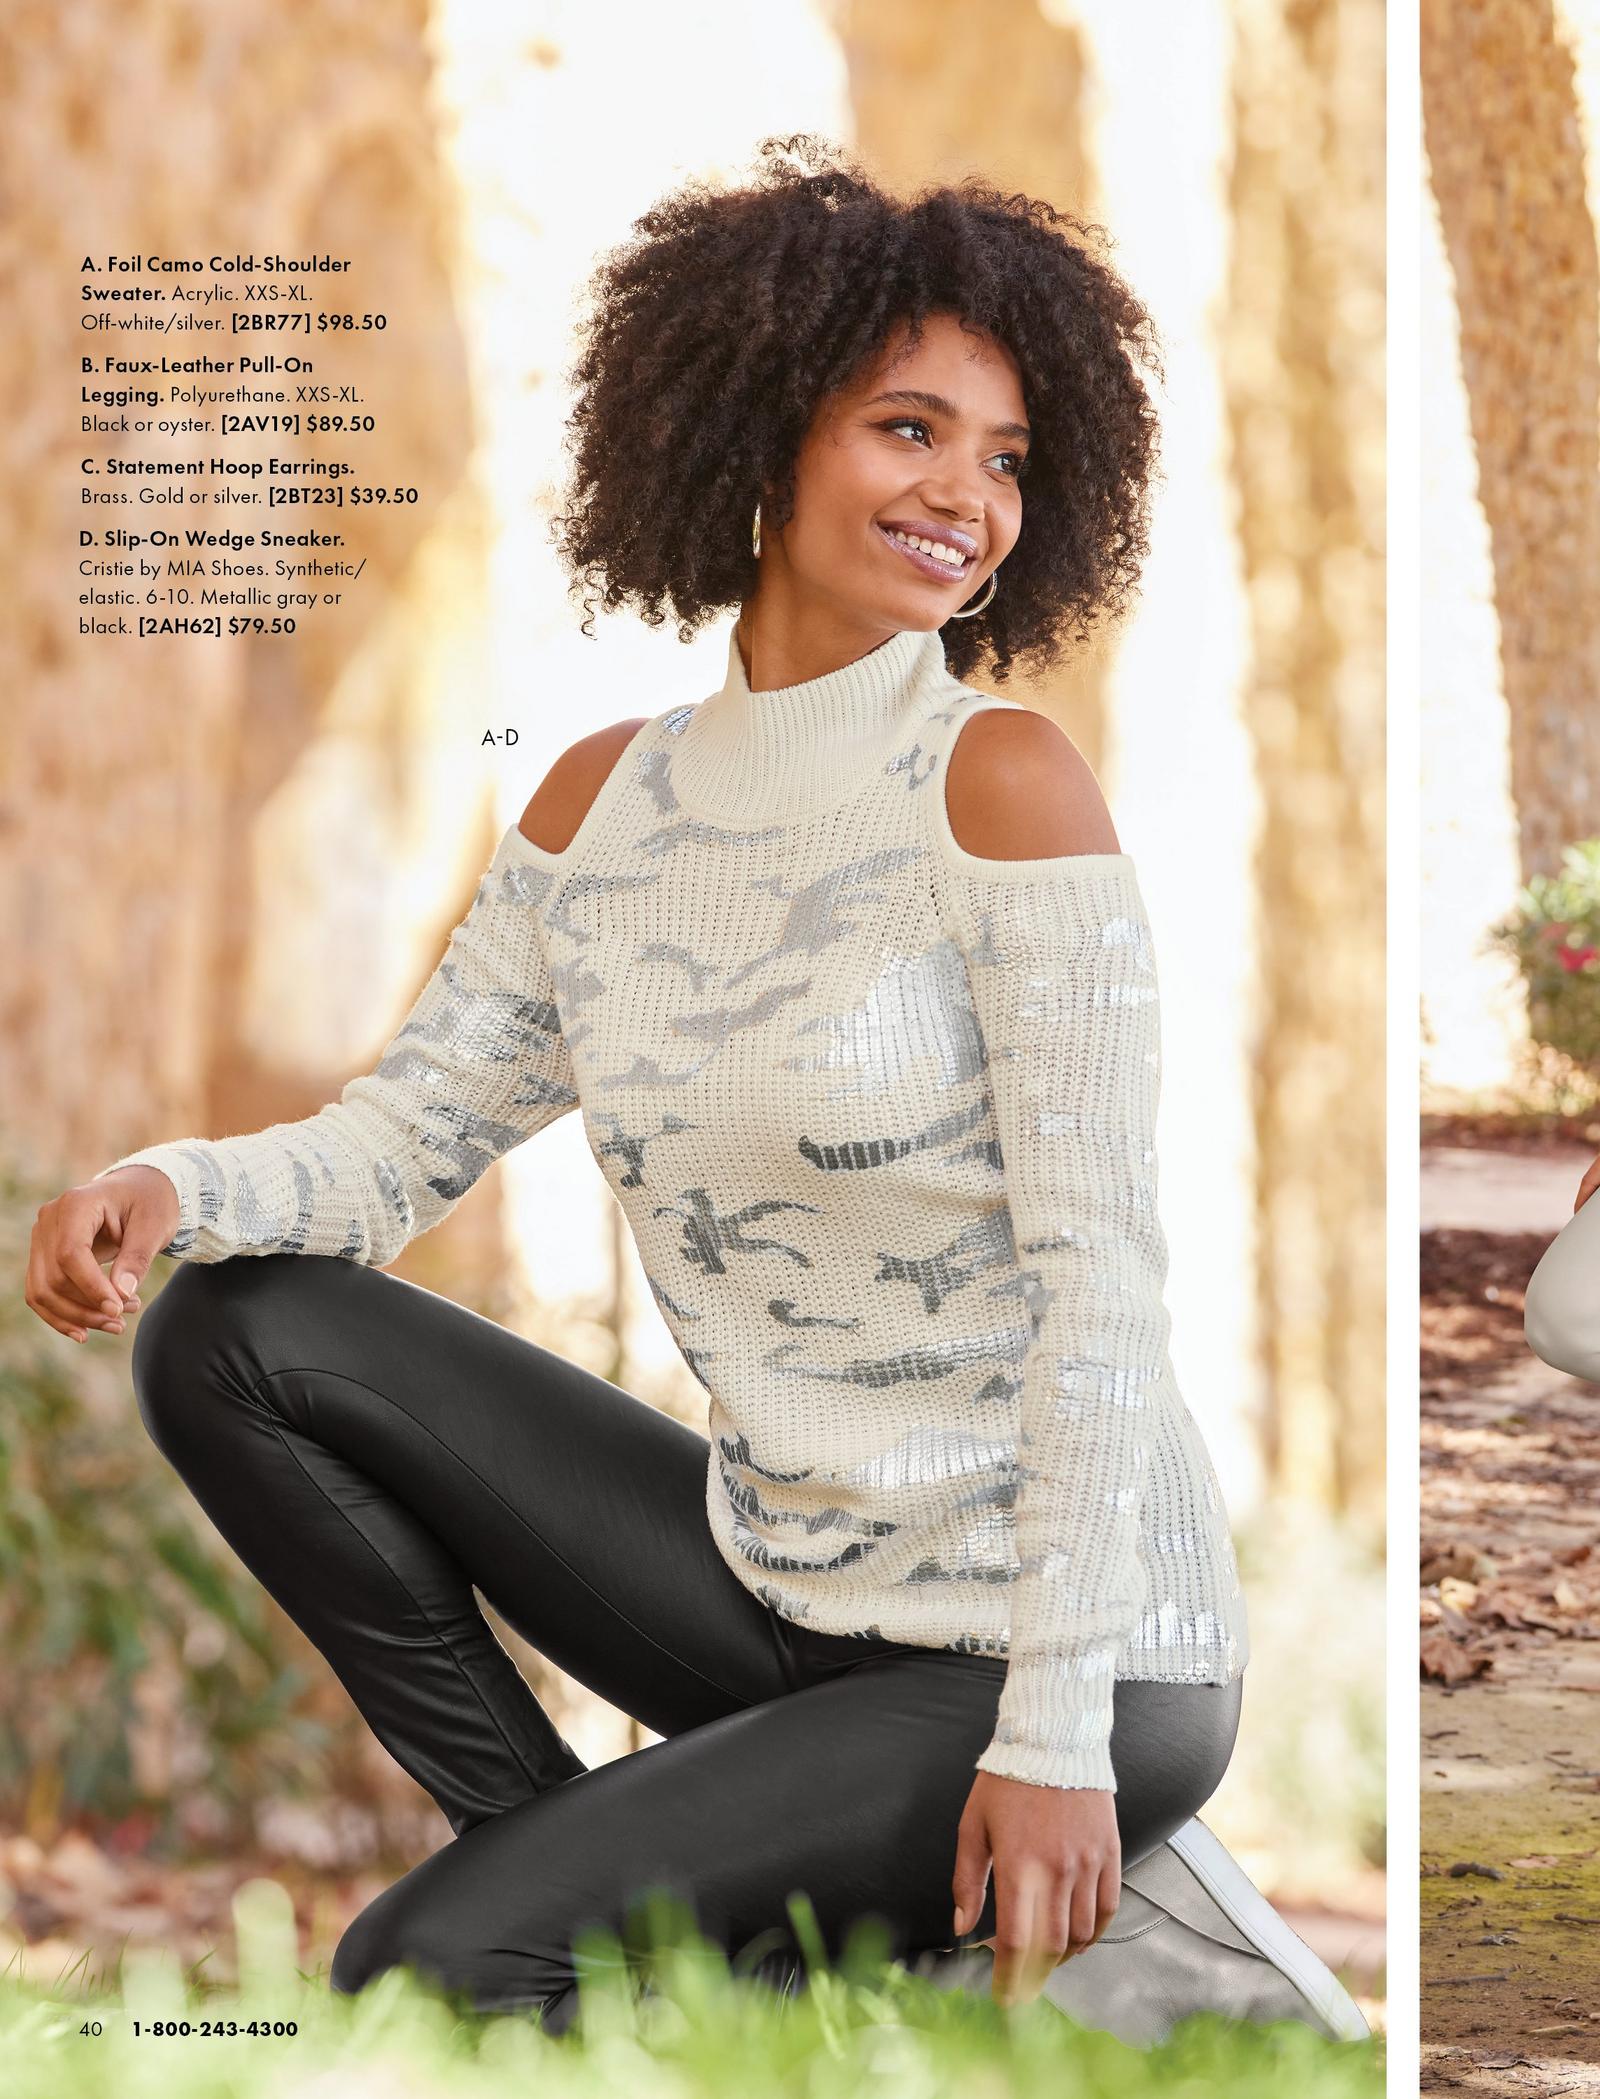 model wearing a white camo print foil embellished cold-shoulder turtleneck sweater, black faux leather leggings, silver hoop earrings, and gray metallic sneaker wedges.